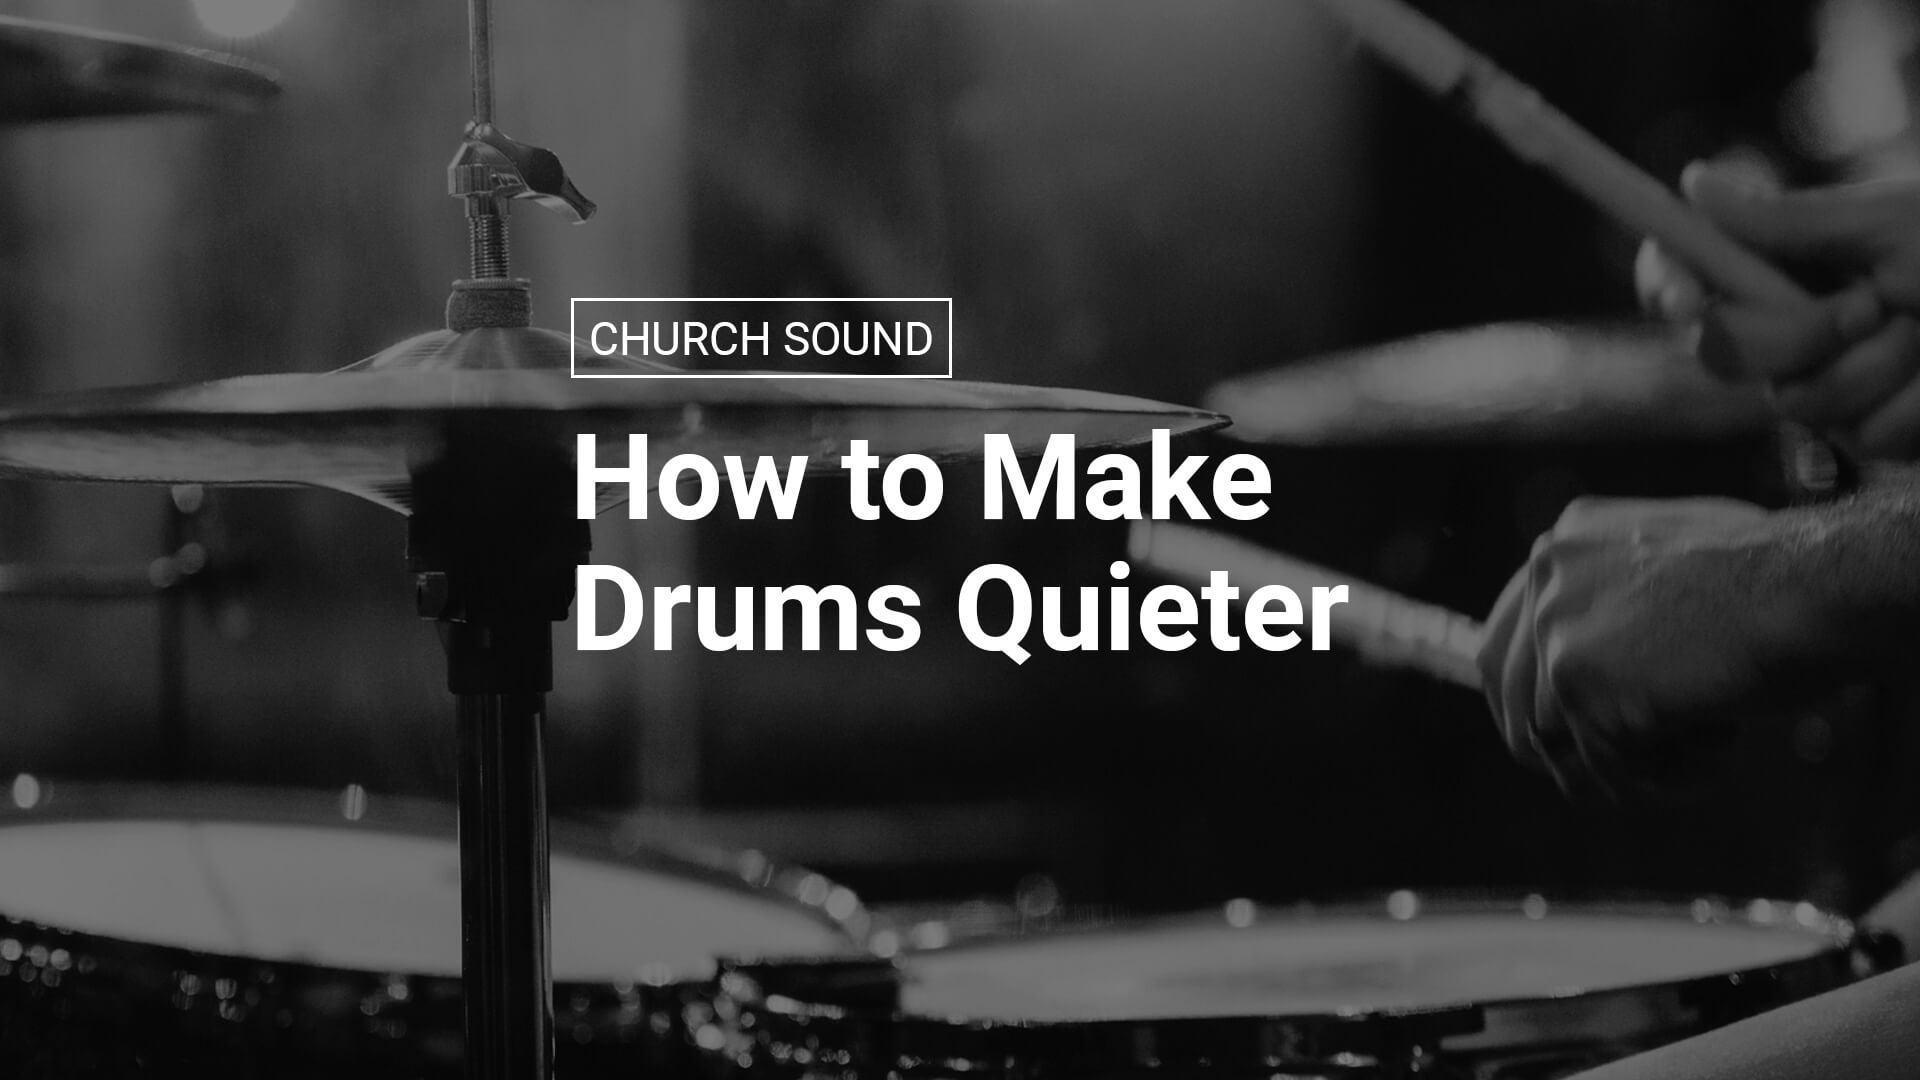 How to Make Drums Quieter